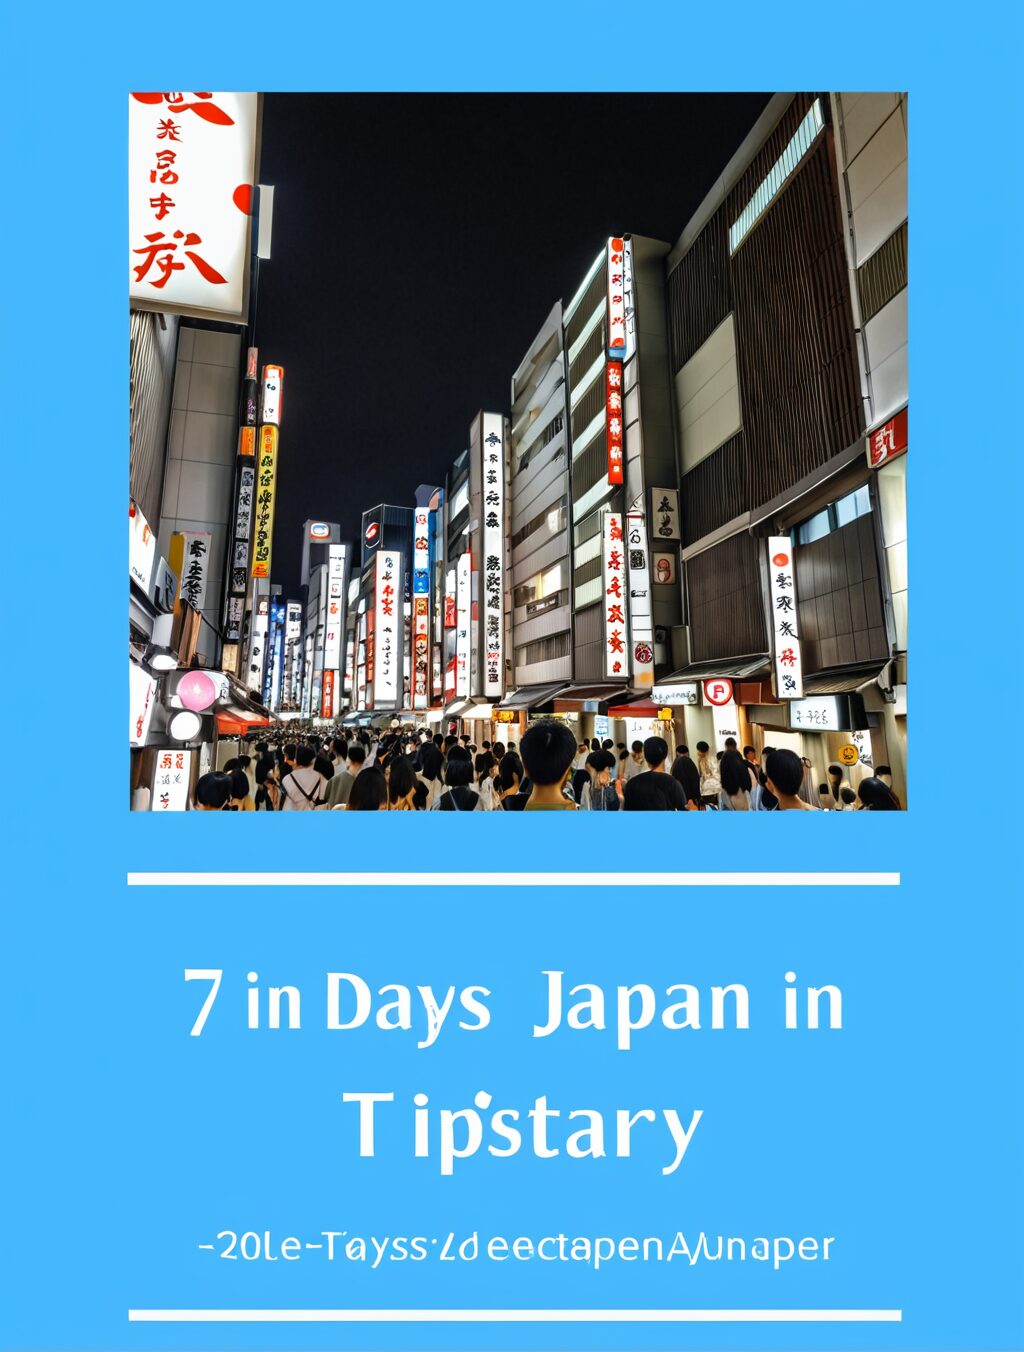 7 days in japan itinerary